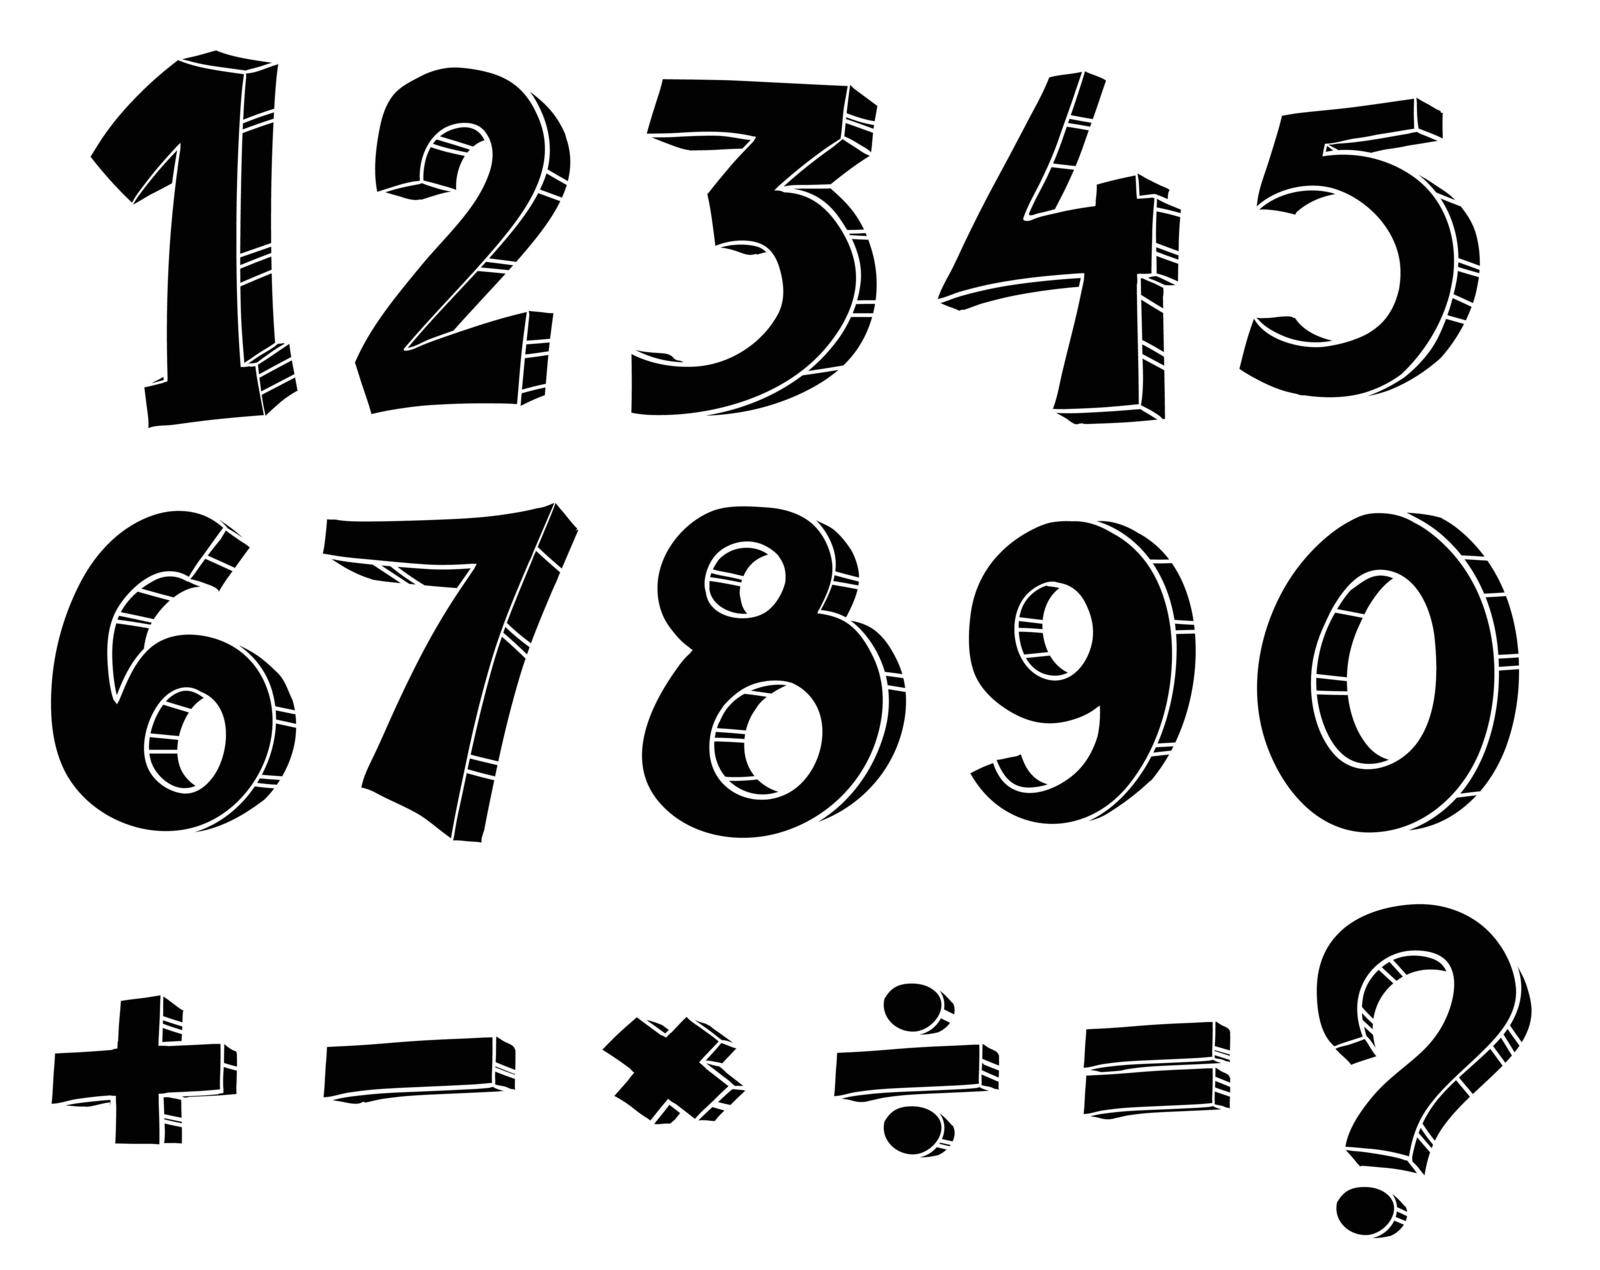 Illustration of the numeric figures and mathematical operations on a white background